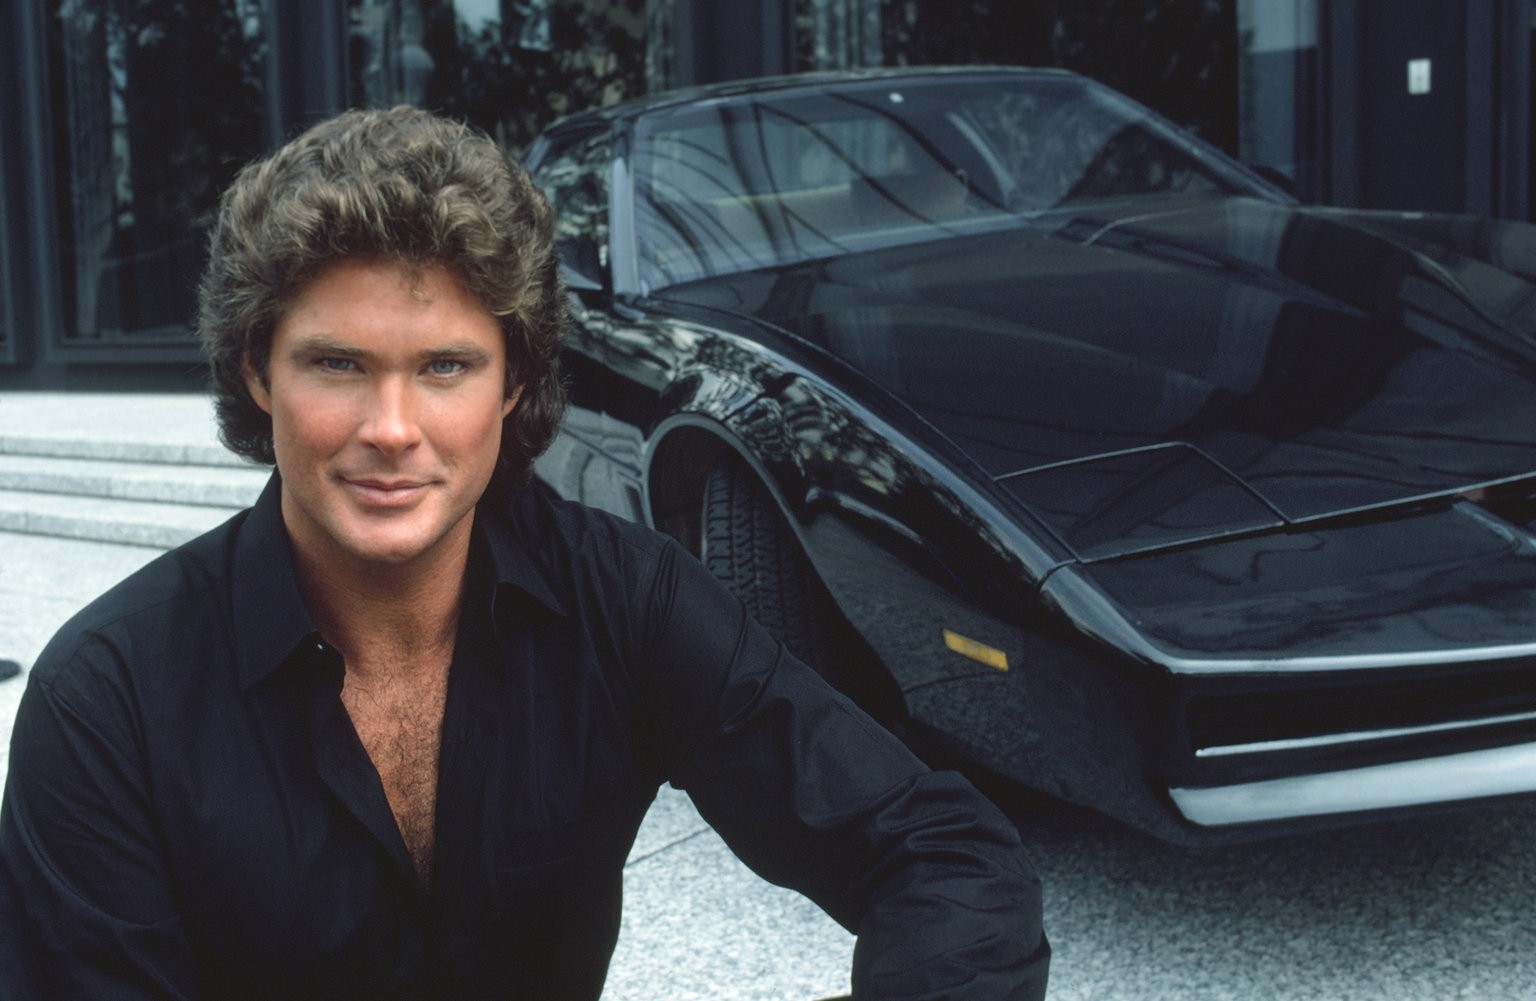 People 1536x1001 men actor TV series David Hasselhoff K.I.T.T. Michael Knight car Pontiac black cars looking at viewer 1980s smiling shirt building outdoors Knight Rider face legend pop-up headlights frontal view